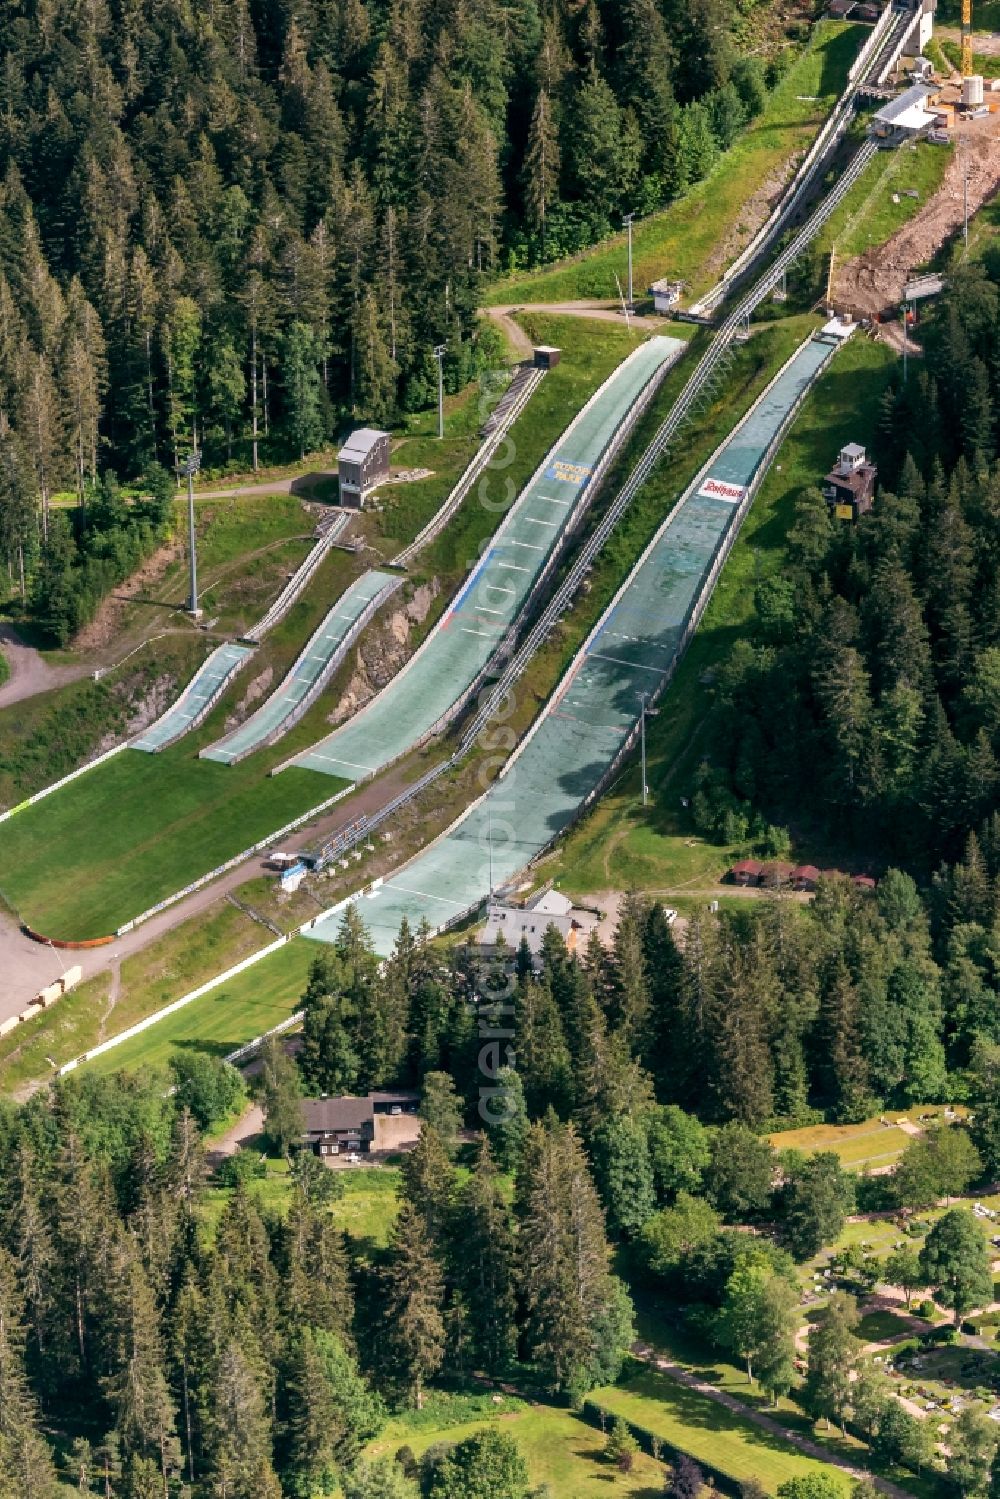 Hinterzarten from the bird's eye view: Training and competitive sports center of the ski jump Adler in Hinterzarten in the state Baden-Wurttemberg, Germany